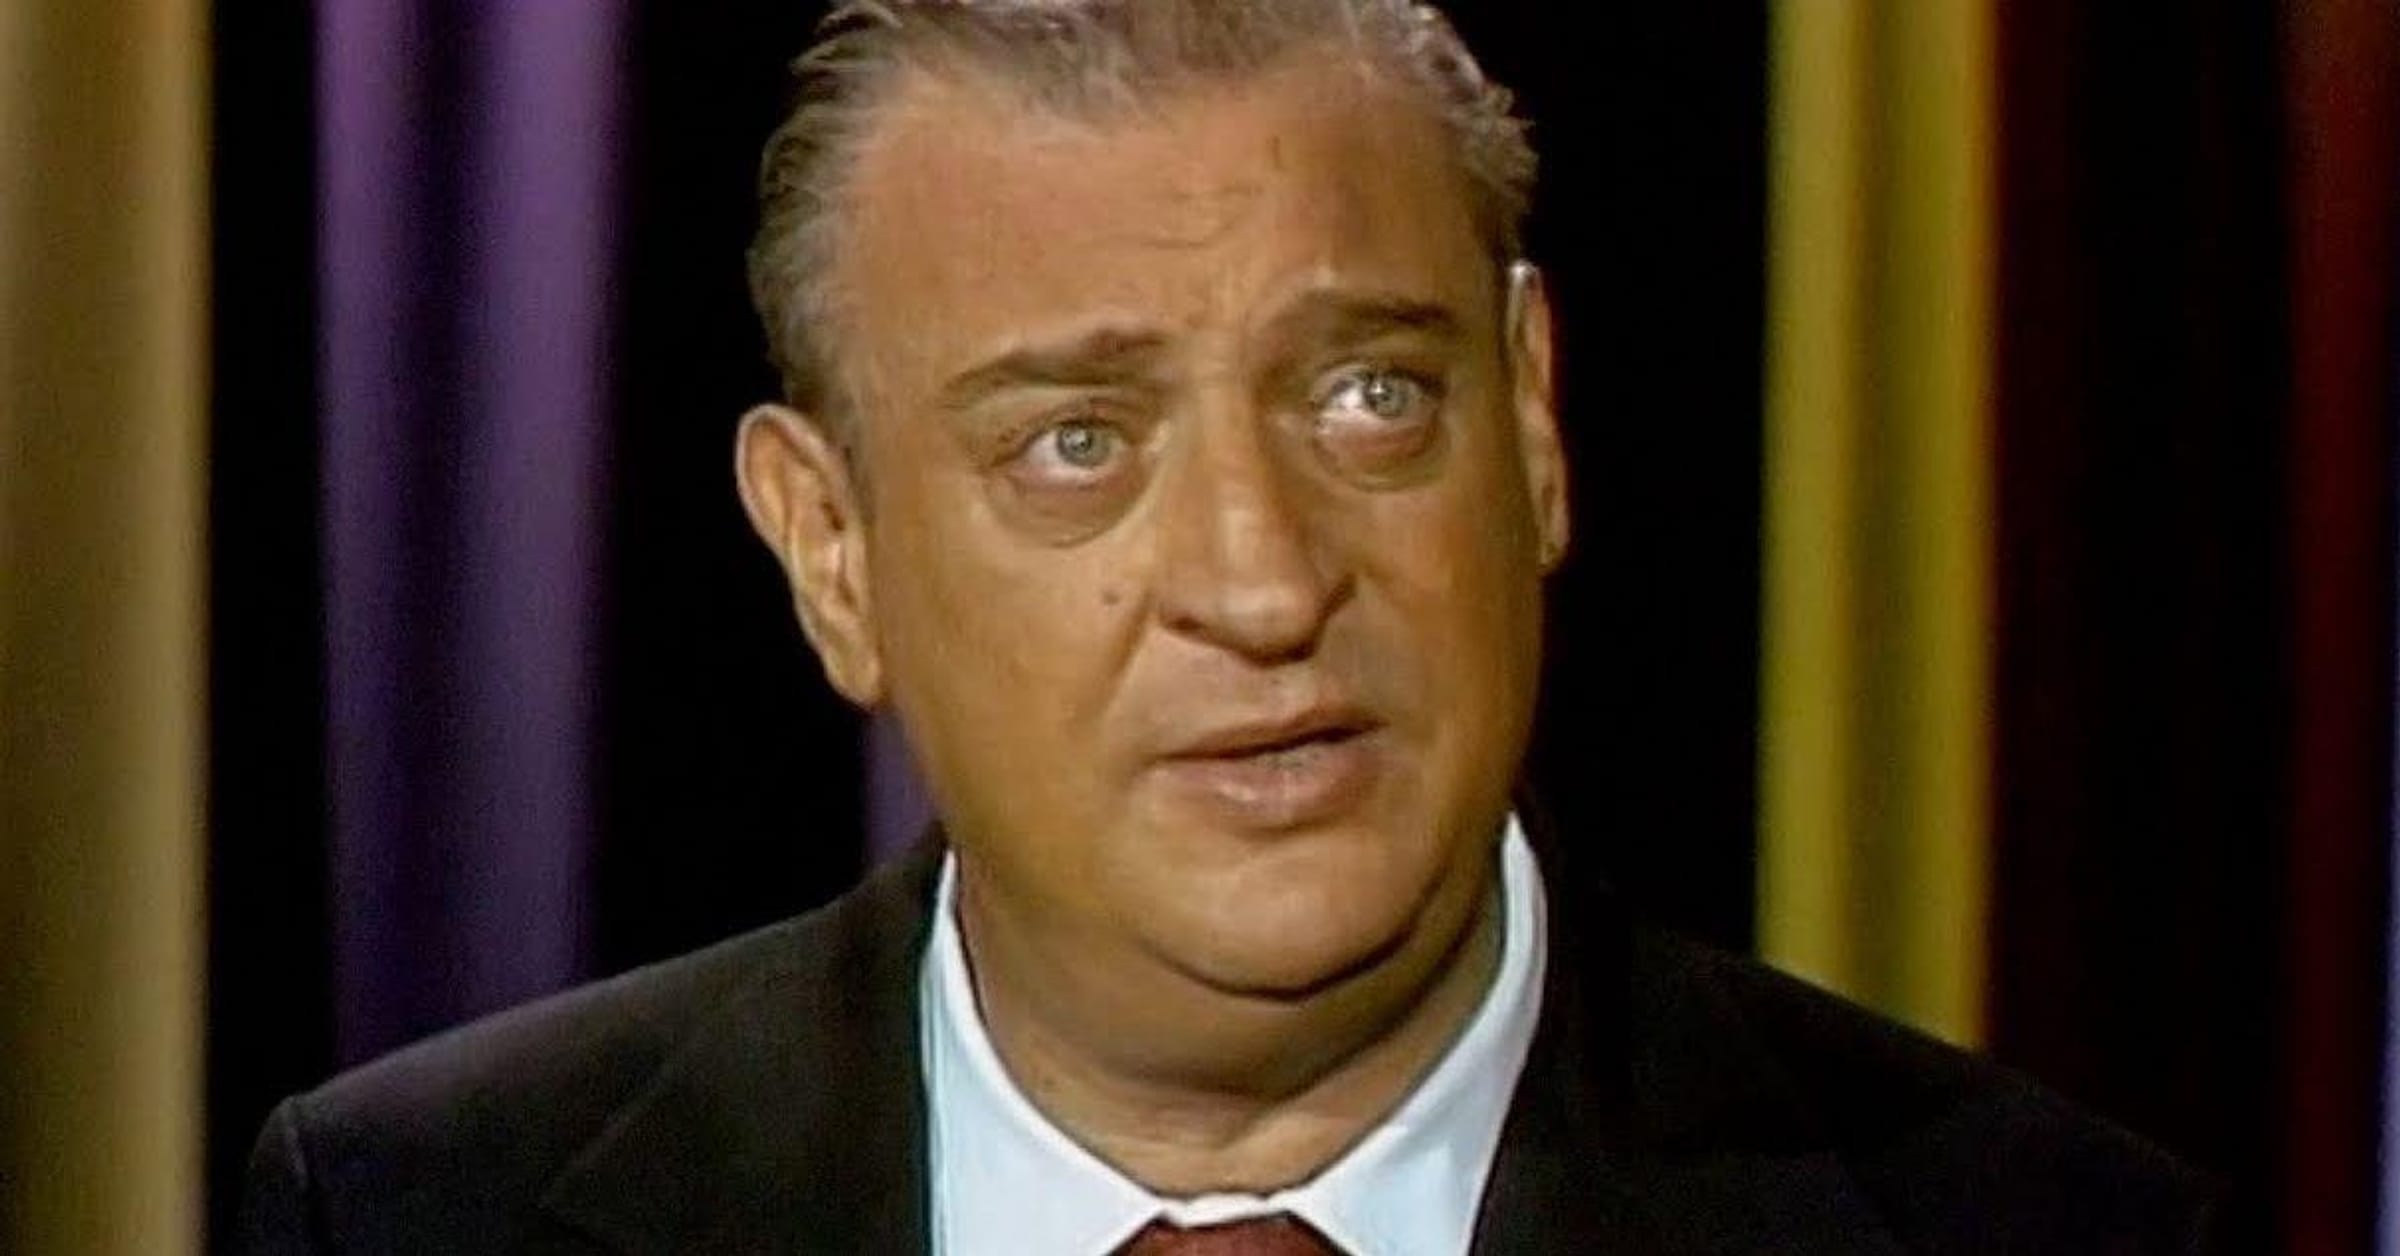 Rodney Dangerfield quote: I'll tell ya, my wife and I, we don't think